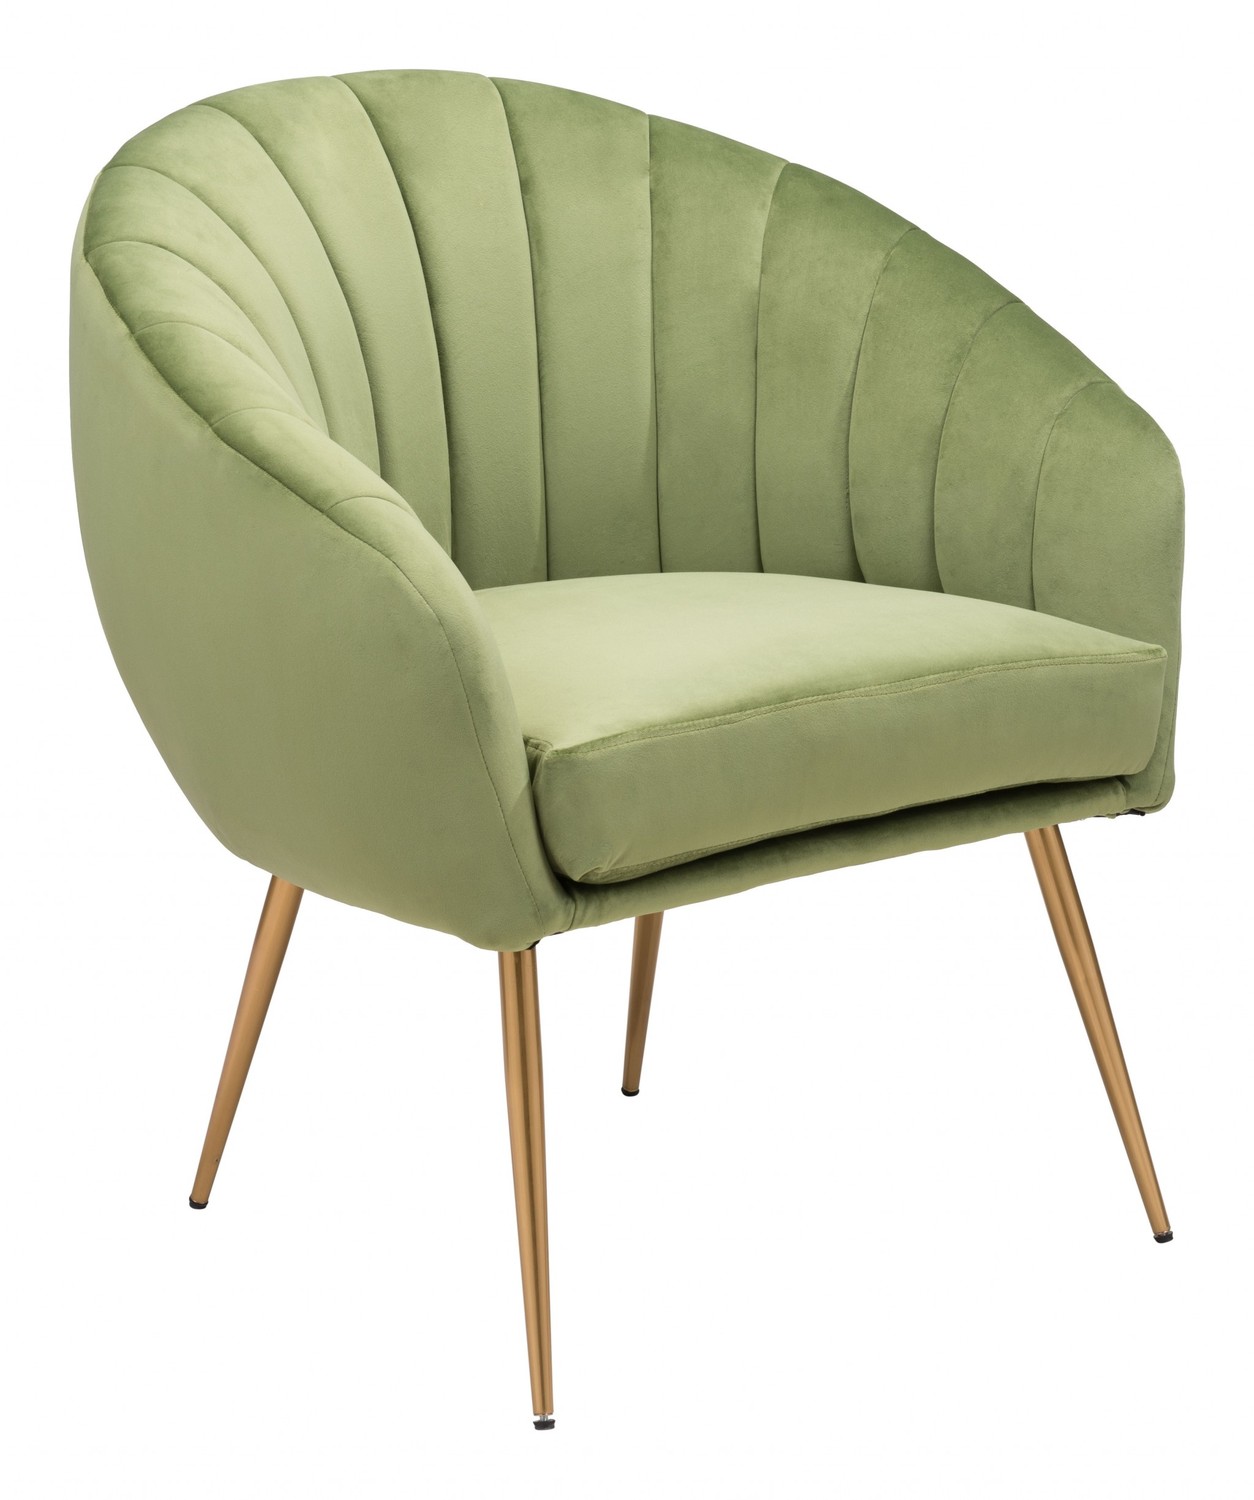 Mossy Green and Gold Curve Vertical Channel Accent Club Chair